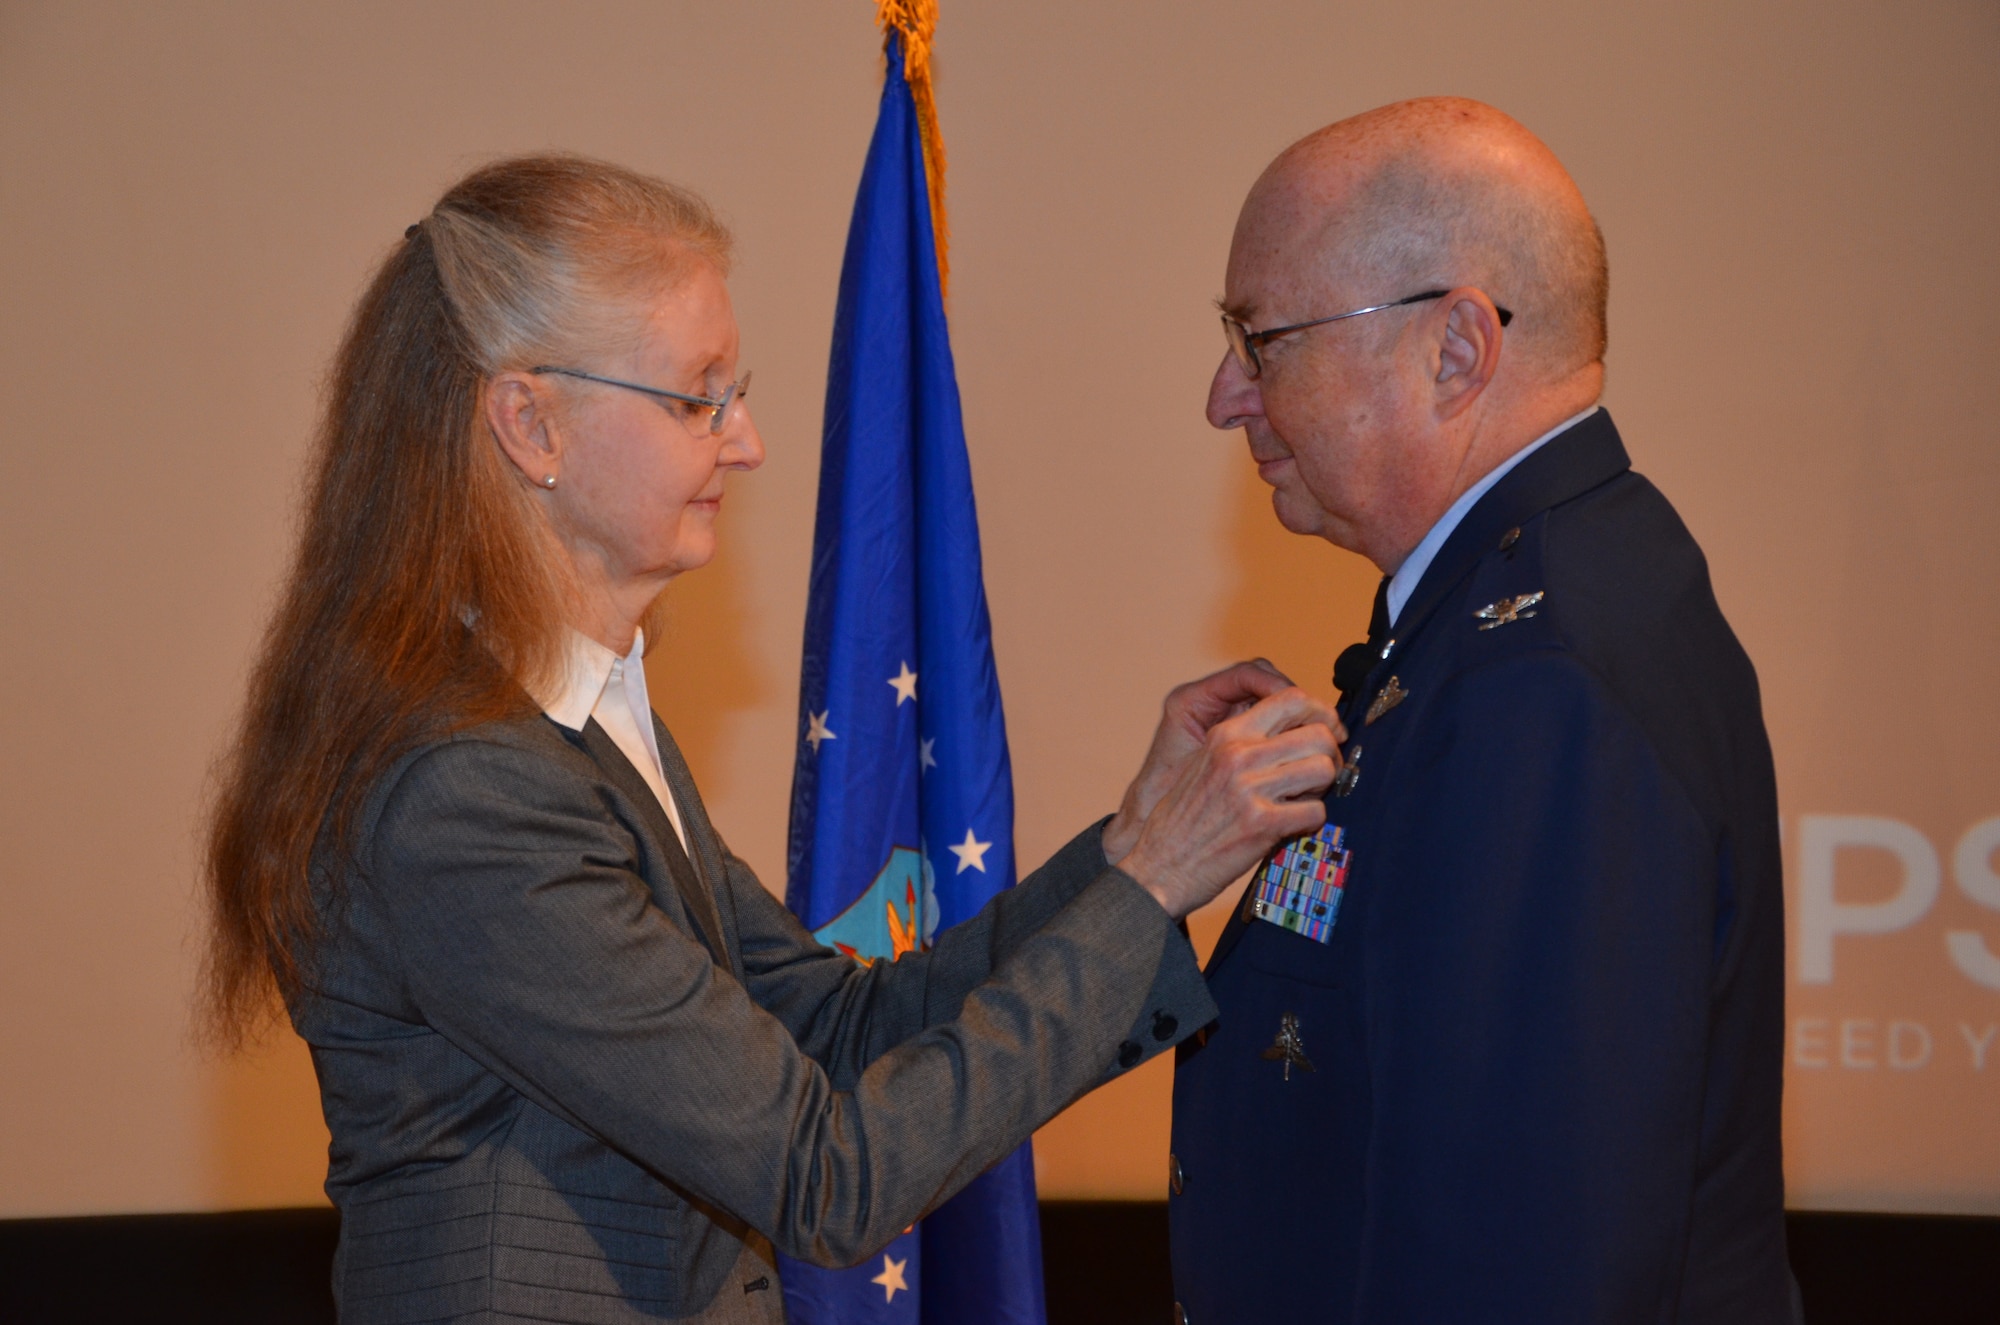 Col. (Dr.) Lewis Neace receives his official retirement pin from his wife at his retirement ceremony at Patrick Air Force Base Jan. 11, 2015. Neace completed more than 31 years of service as an Air Force Reserve physician and was most recently the commander of the 920th Aeromedical Staging Squadron at Patrick. (U.S. Air Force photo/2nd Lt. Anna-Marie Wyant)